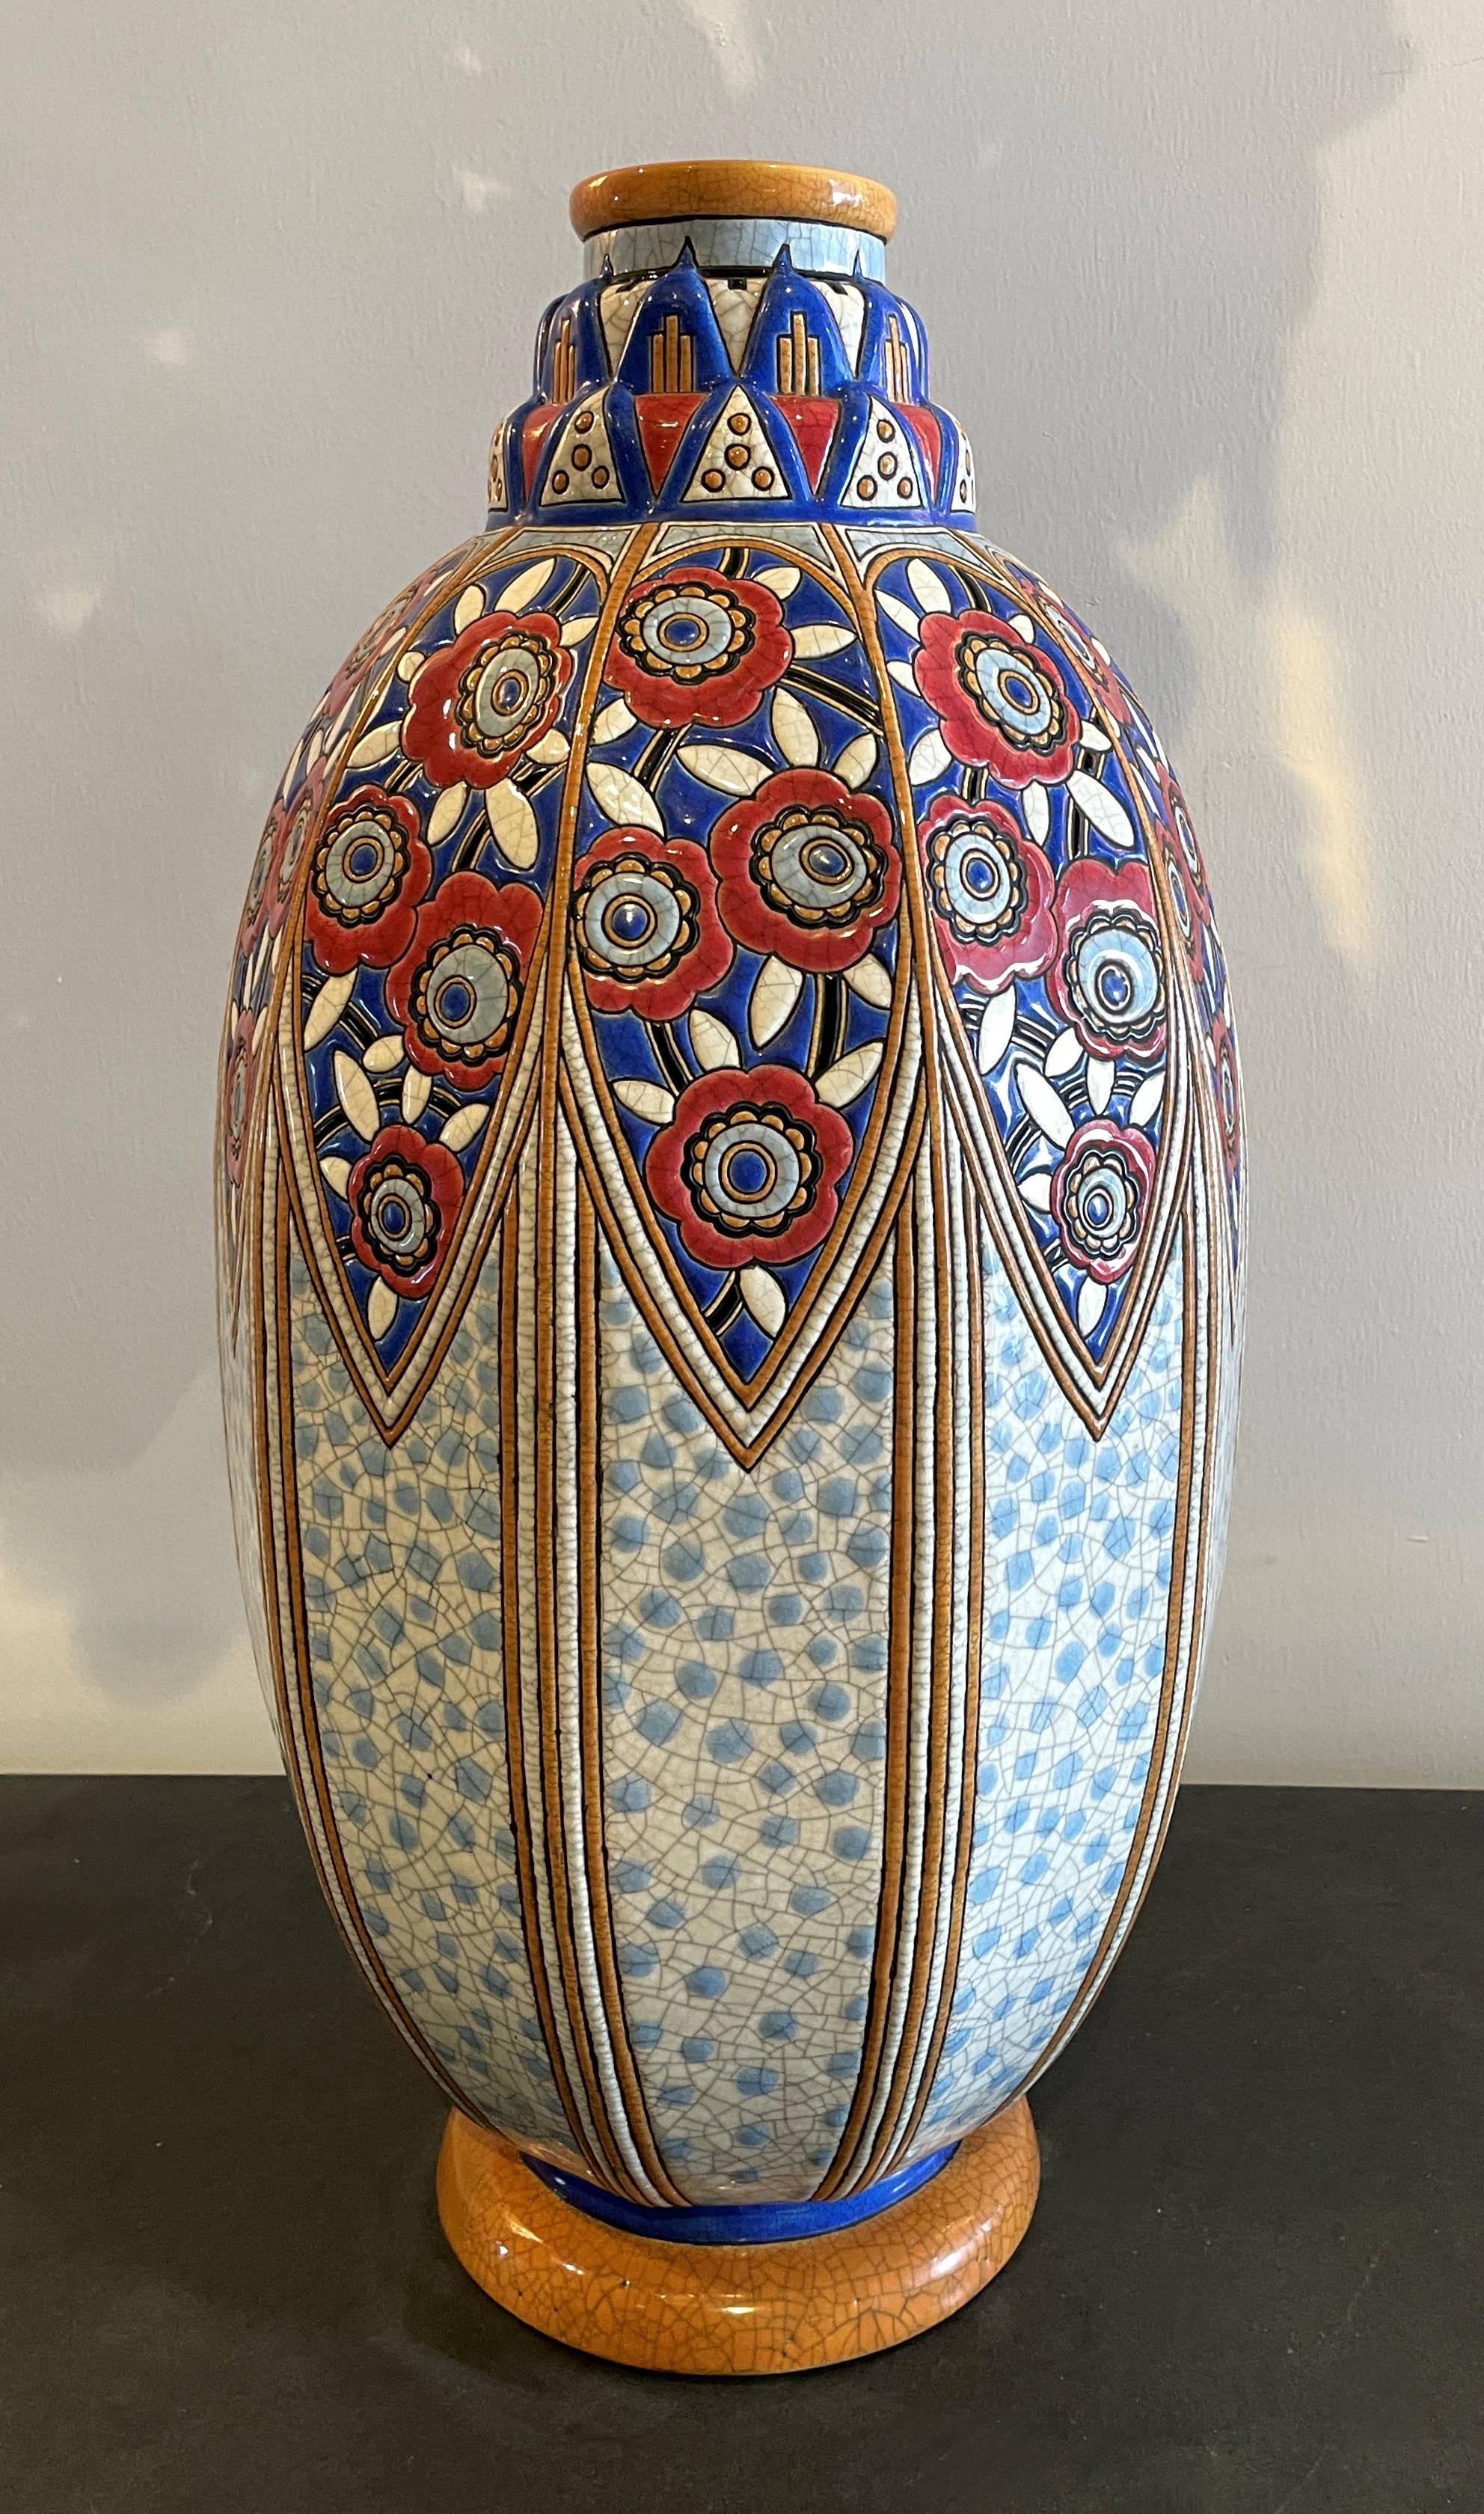 A rare and beautiful French Art Deco Longwy enameled exhibit vase created by Maurice Paul Chevalier, unique piece, dated June 15, 1928 

The vase is in very good condition, without chips or cracks.